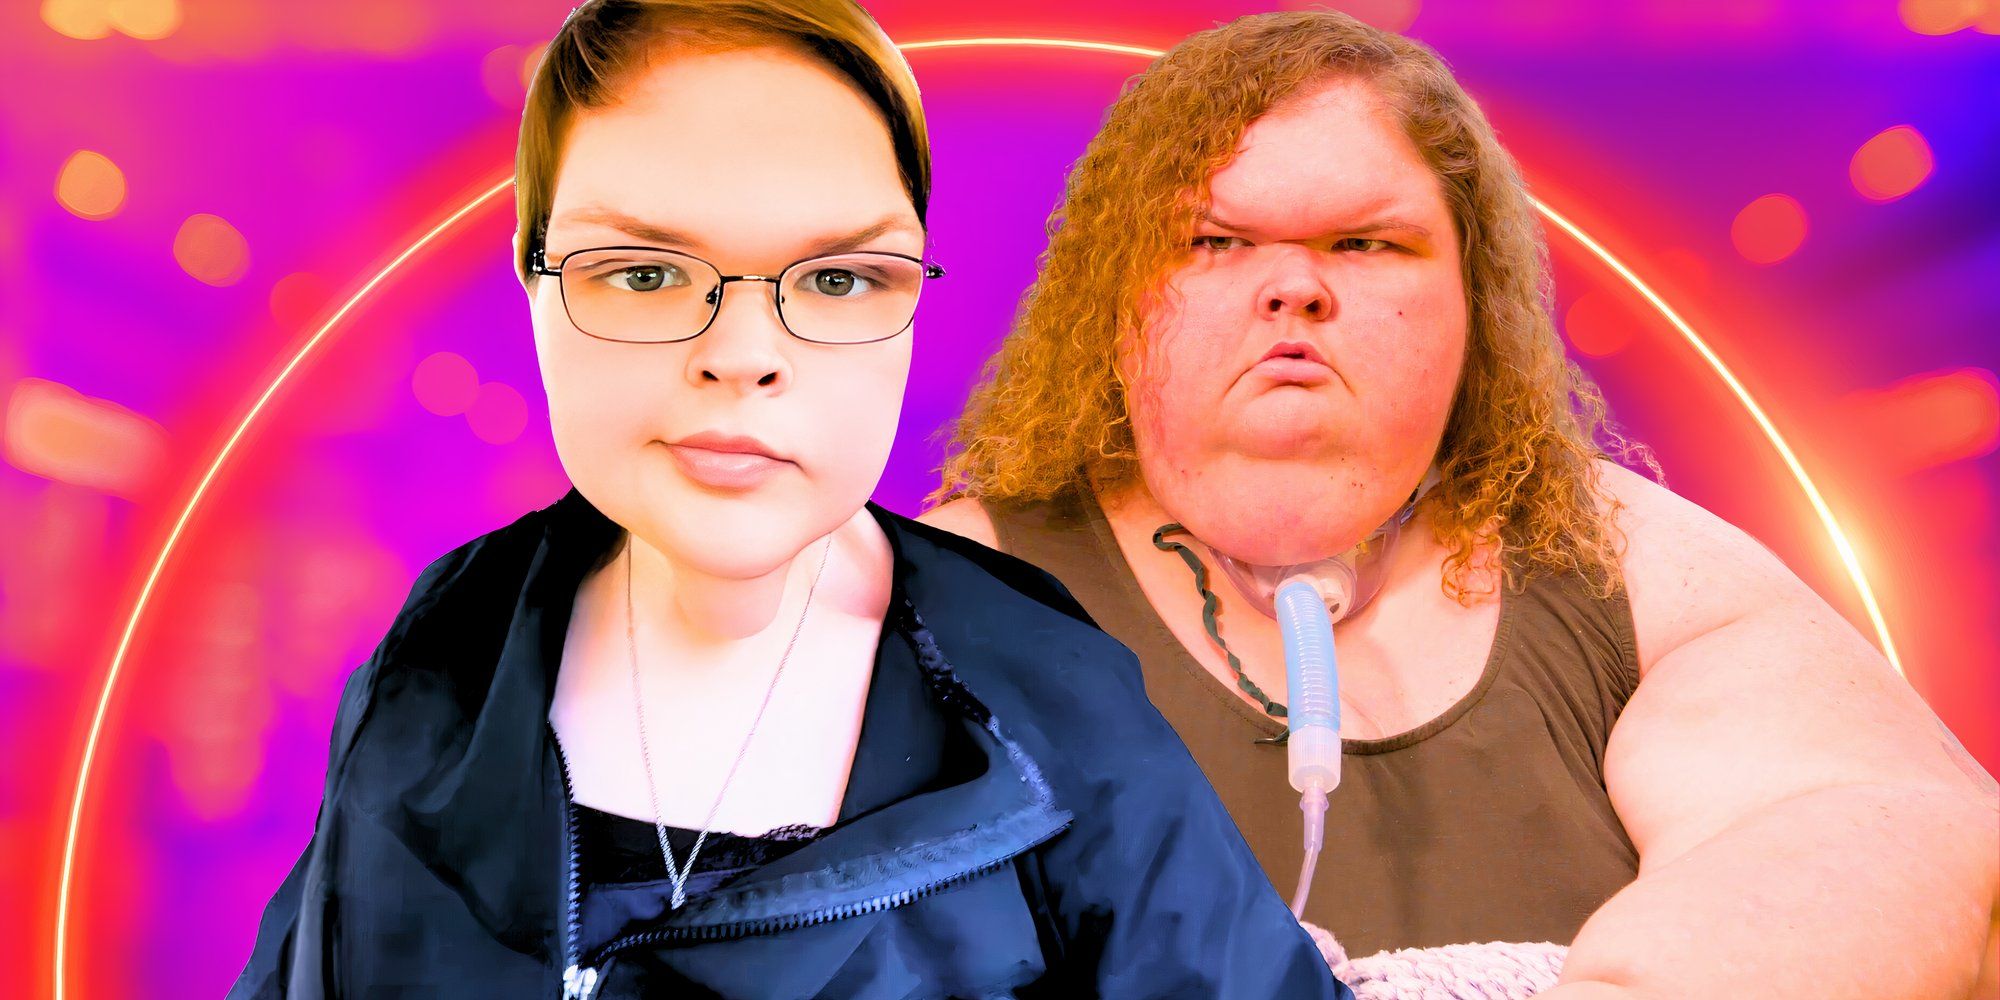 Tammy Slaton from the 1000 lb sisters in the video with short and long hair and pink background